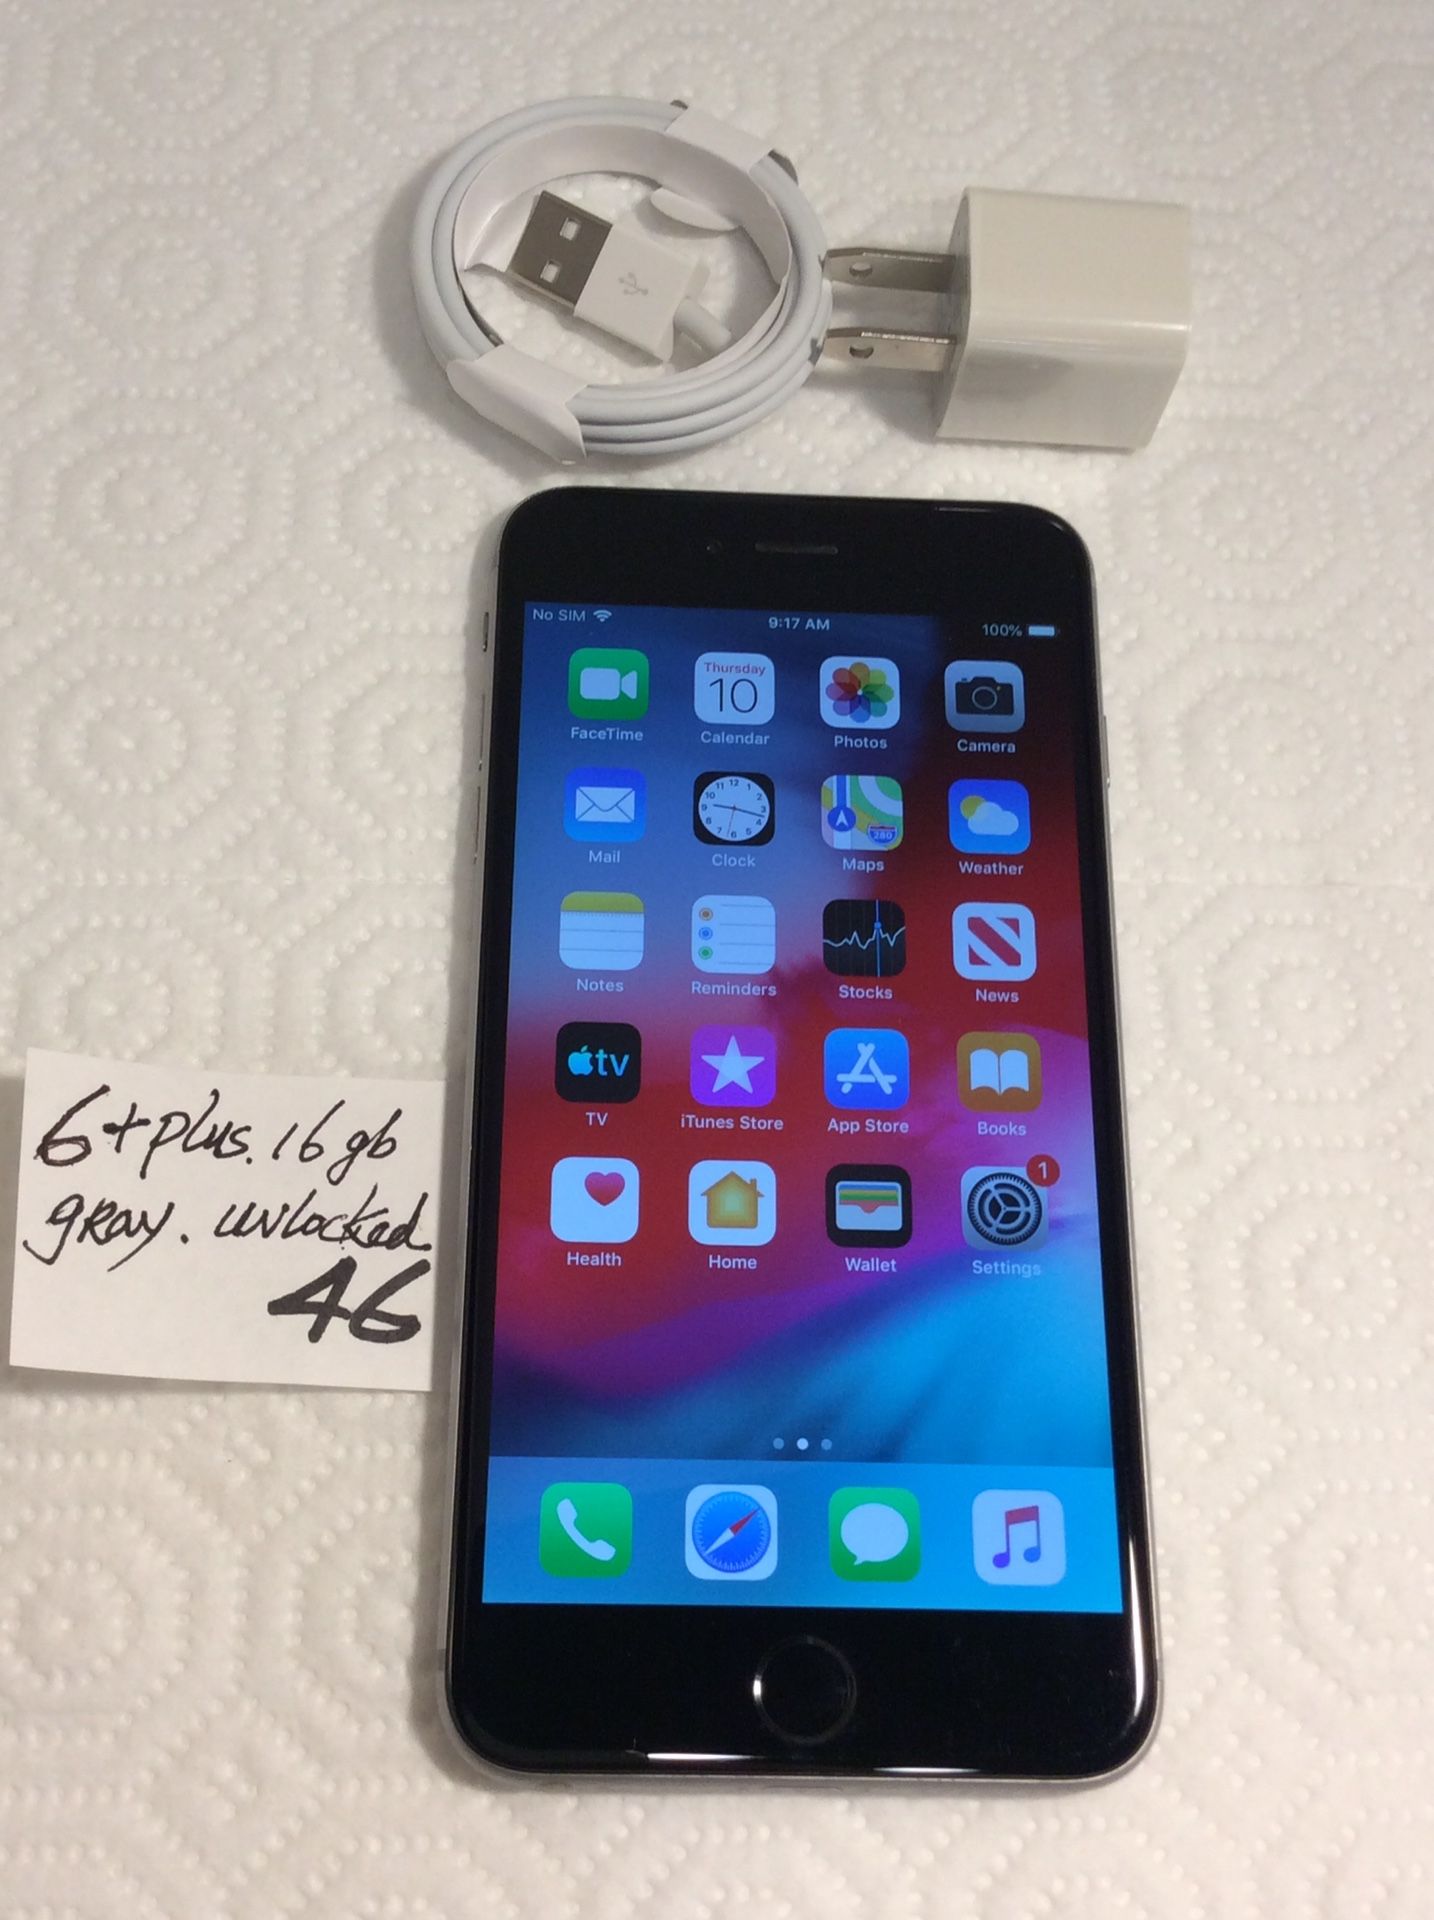 Apple iPhone 6+Plus,16 GB,Unlocked any carrier. Gray/Black,Clean imei ,Clean iCloud,Fully Functional,Mint Conditions.